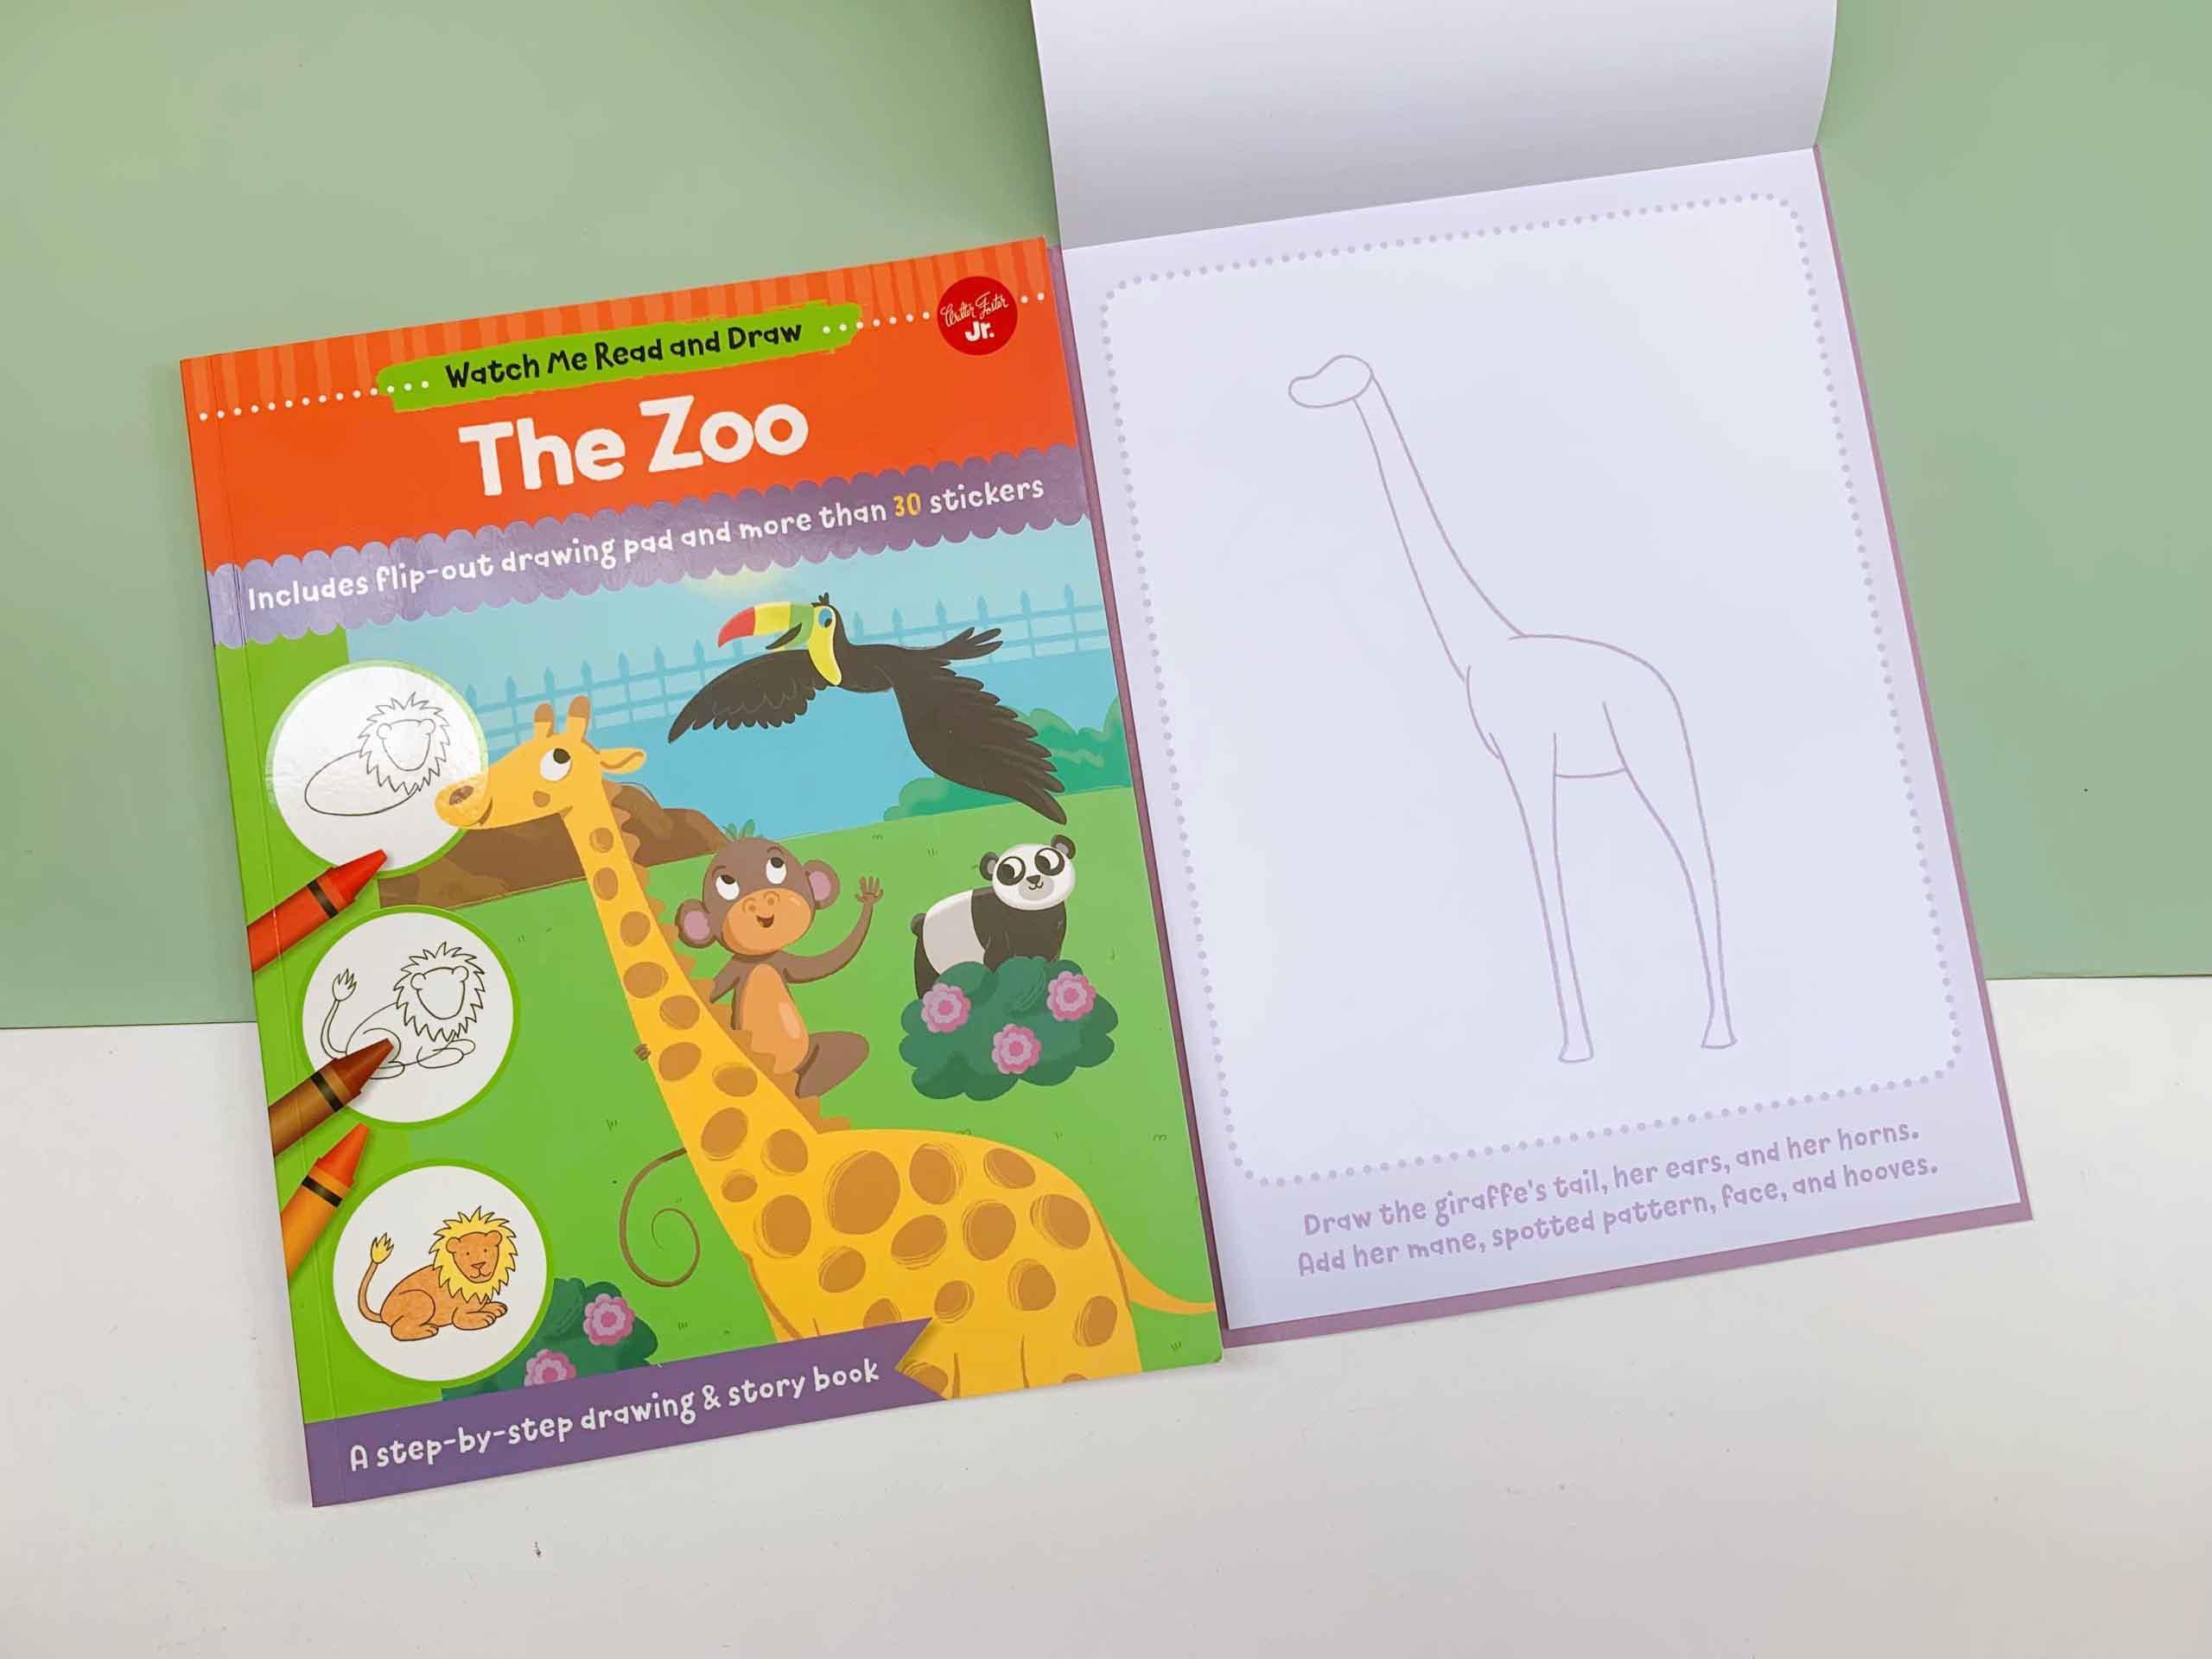 Watch Me Read and Draw: The Zoo : A step-by-step drawing &amp; story book